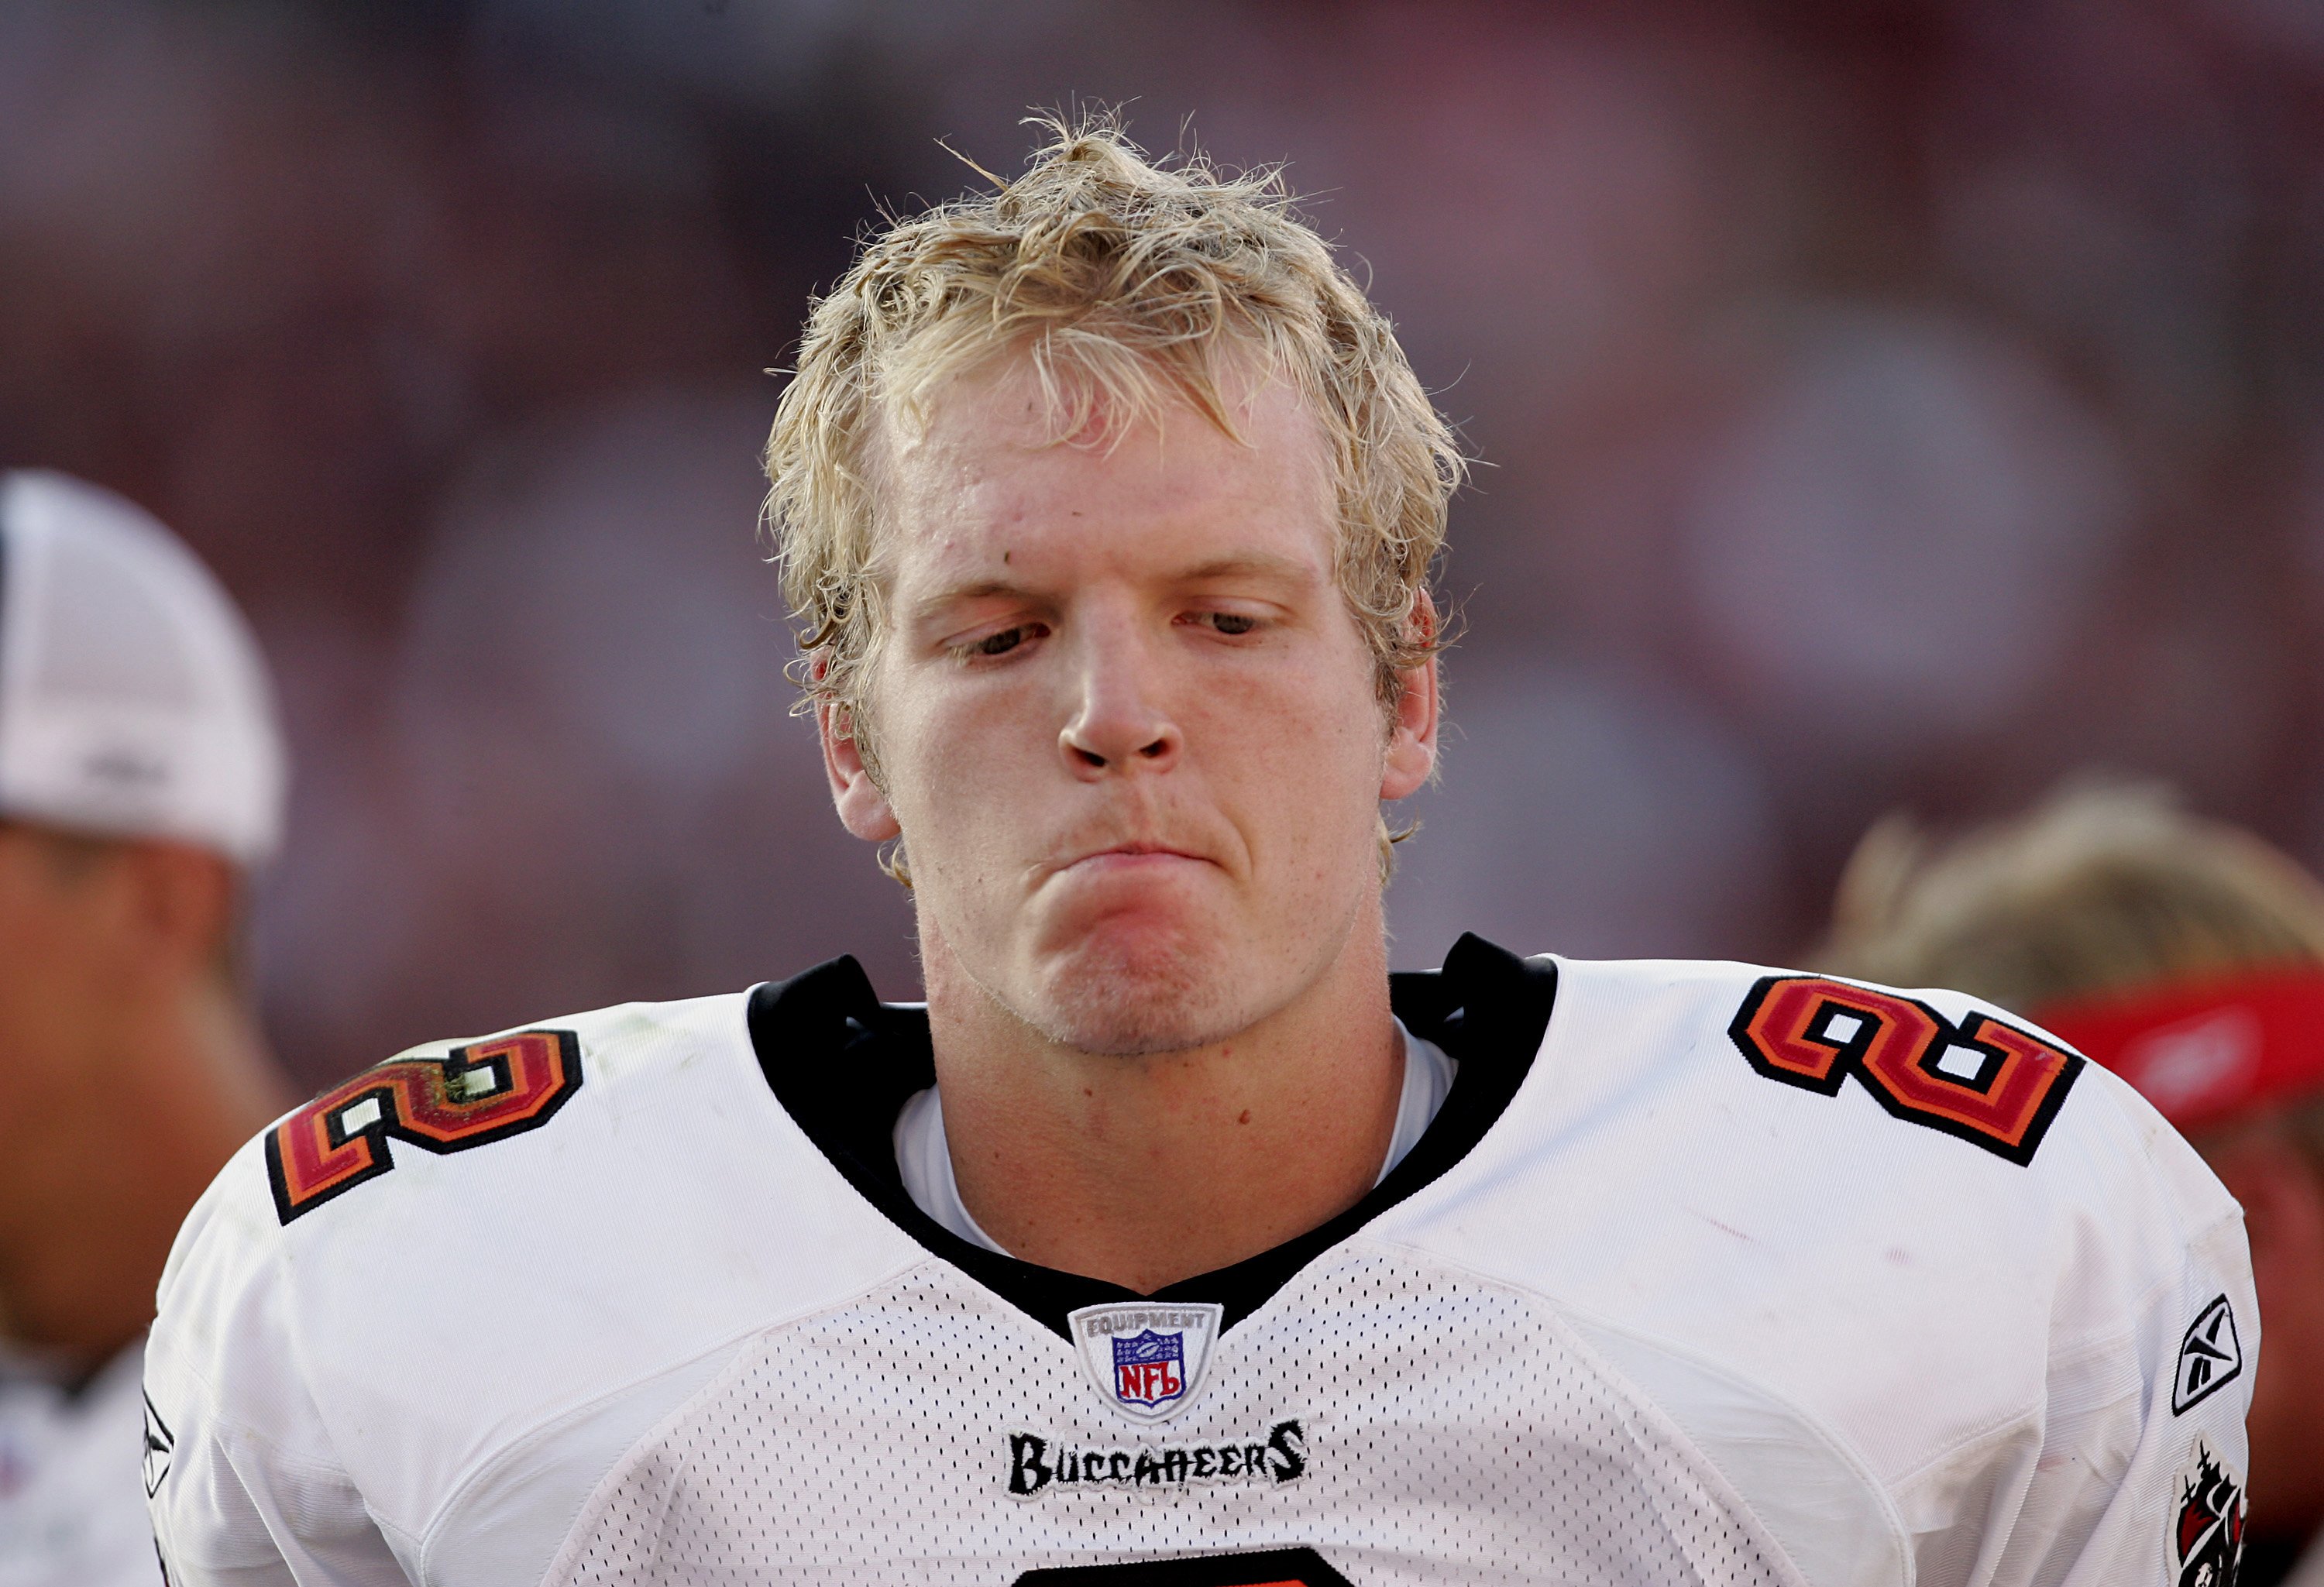 Chris Simms late in the fourth quarter as the San Francisco 49ers defeated the Tampa Bay Buccaneers in San Francisco on October 30, 2005. | Source: Getty Images